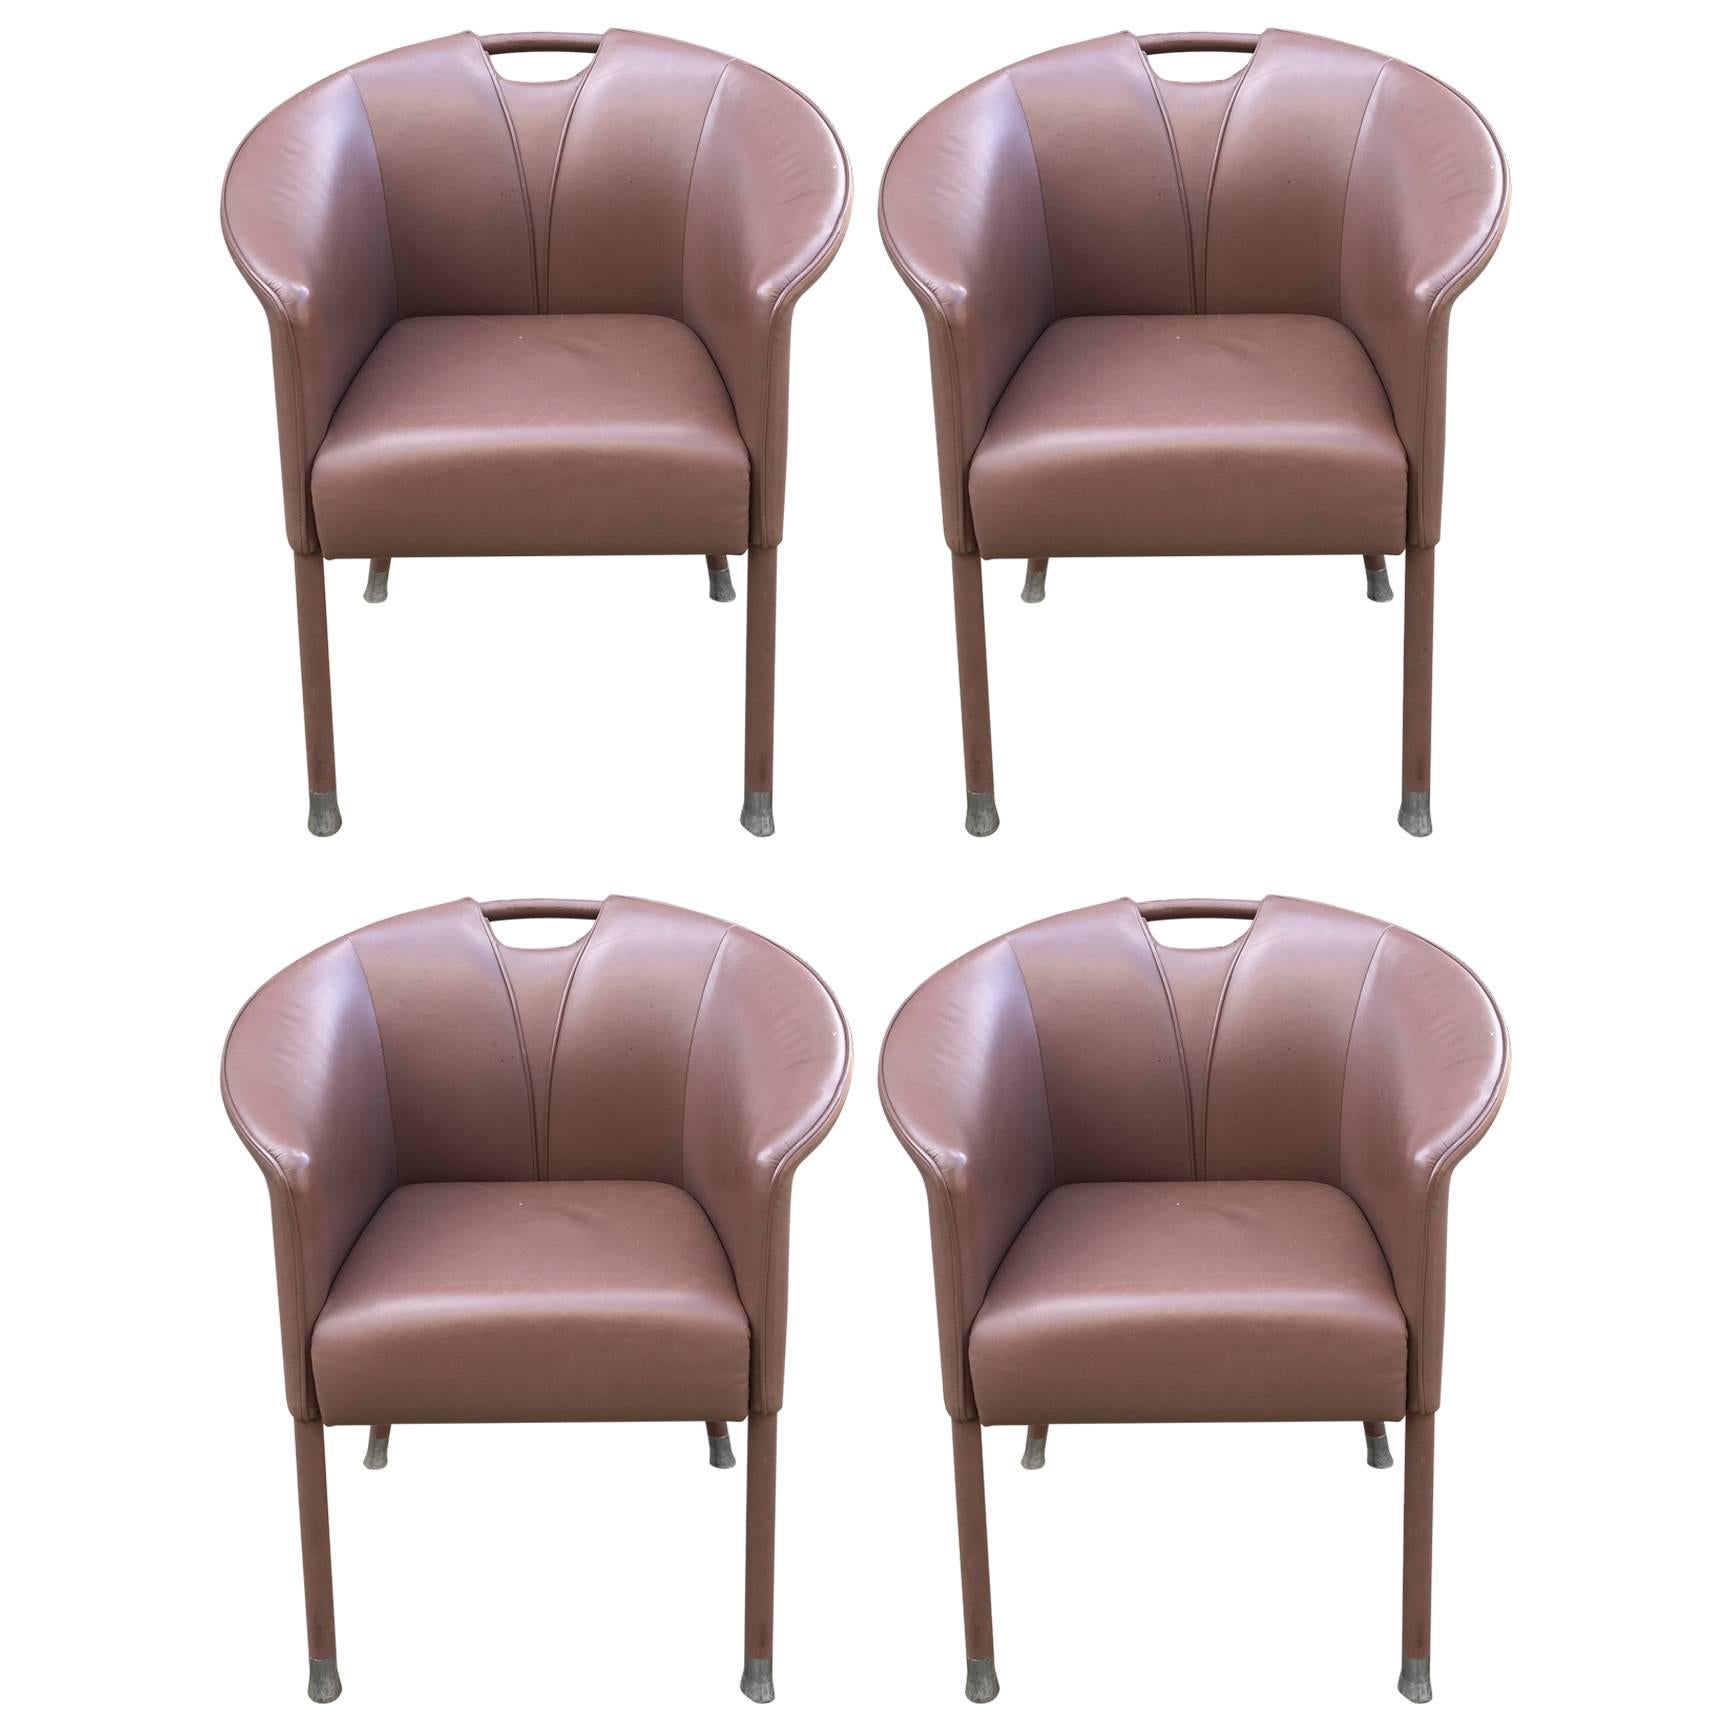 Paolo Piva, 4 Leather Armchairs, Edition Wittmann, circa 1980